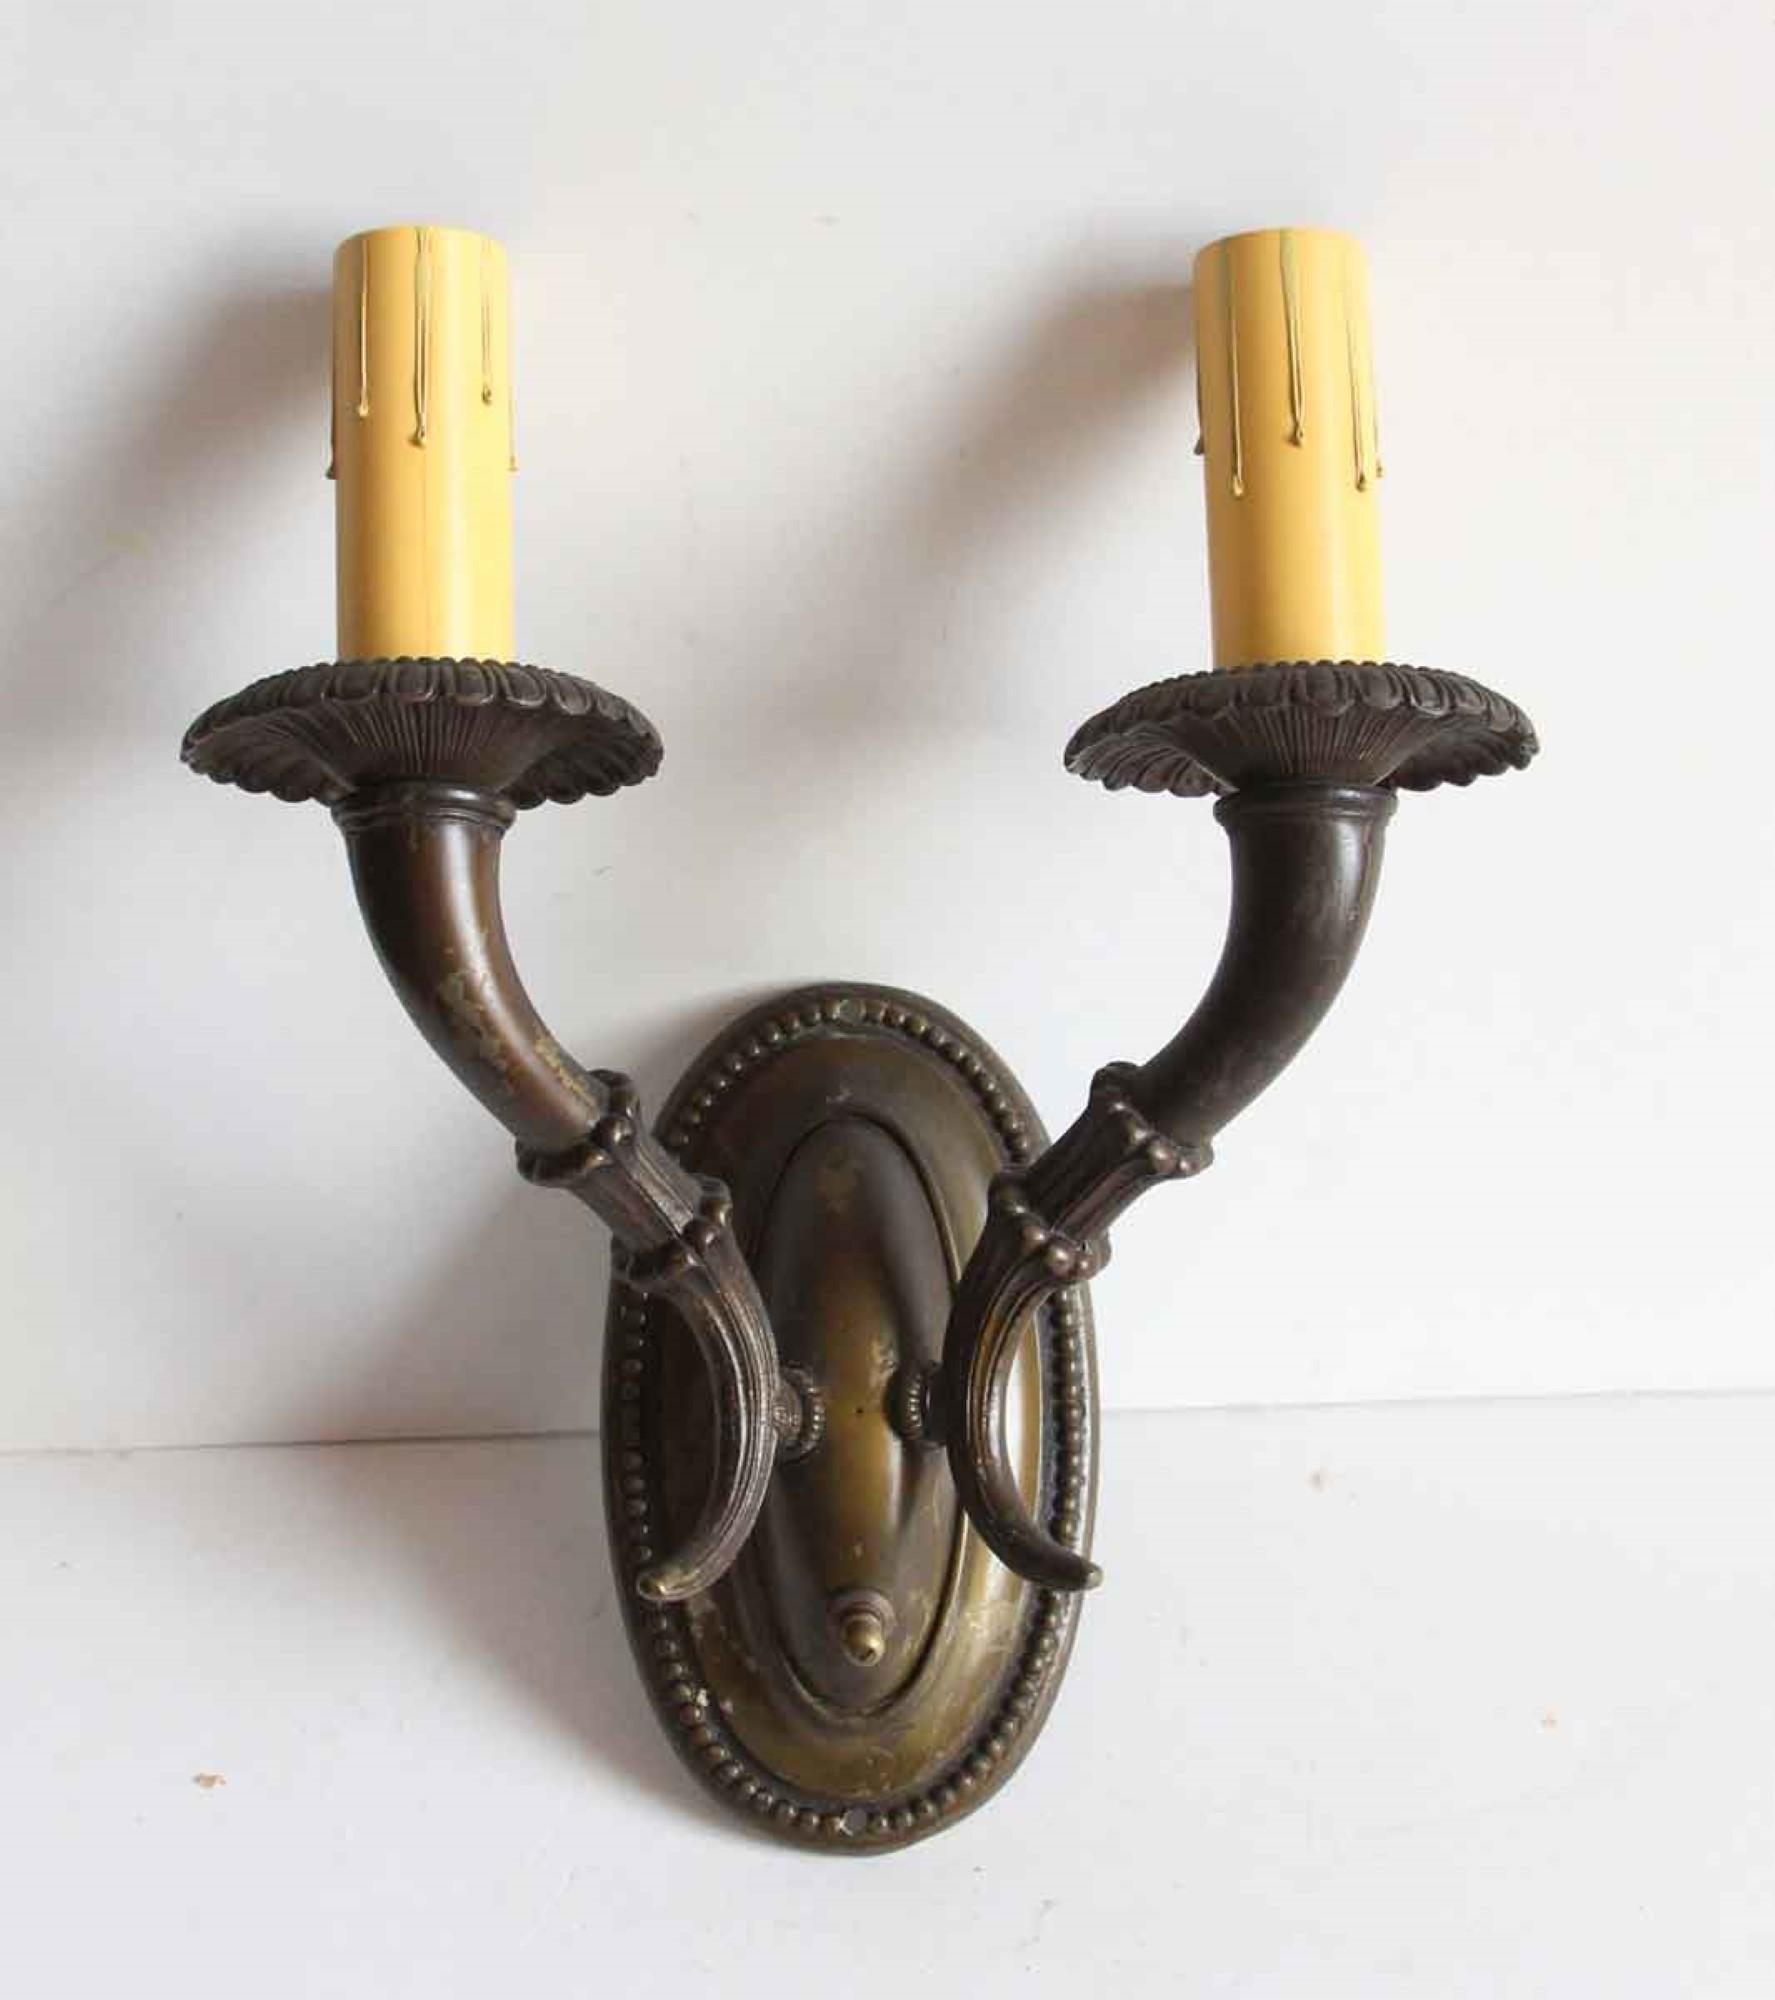 Early 1920s two arm brass candlestick sconces done in an Empire style. Each back is encircled with a beaded detail and each arm is fluted with a cornucopia-like horn coming up to light socket. Price includes restoration. This can be seen at our 400